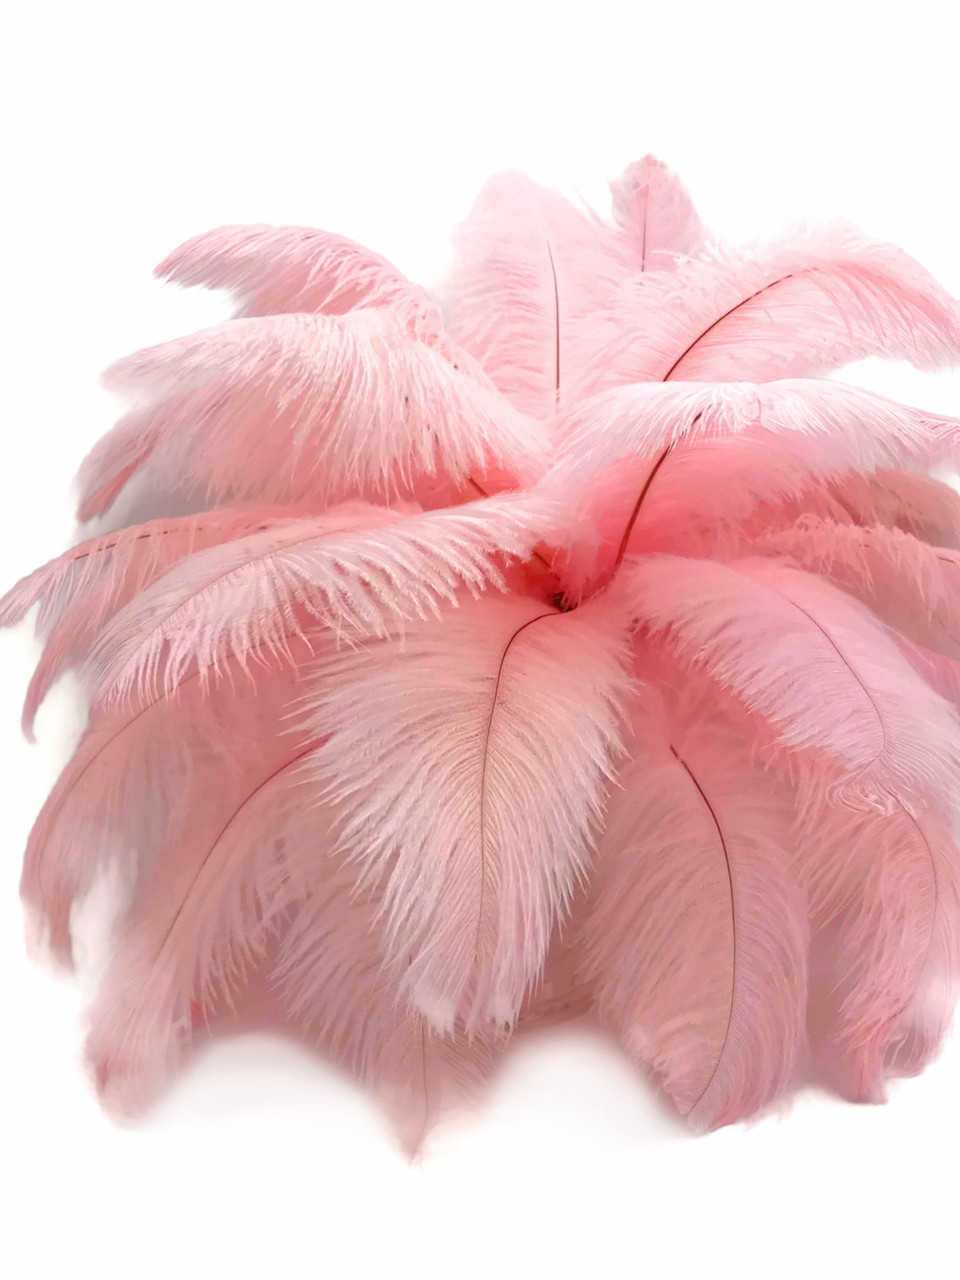 BIG Fluffy 65-70CM Natural Pink Ostrich Feathers Artificial for Vase  Decoration Wedding Party Decorative Plumes